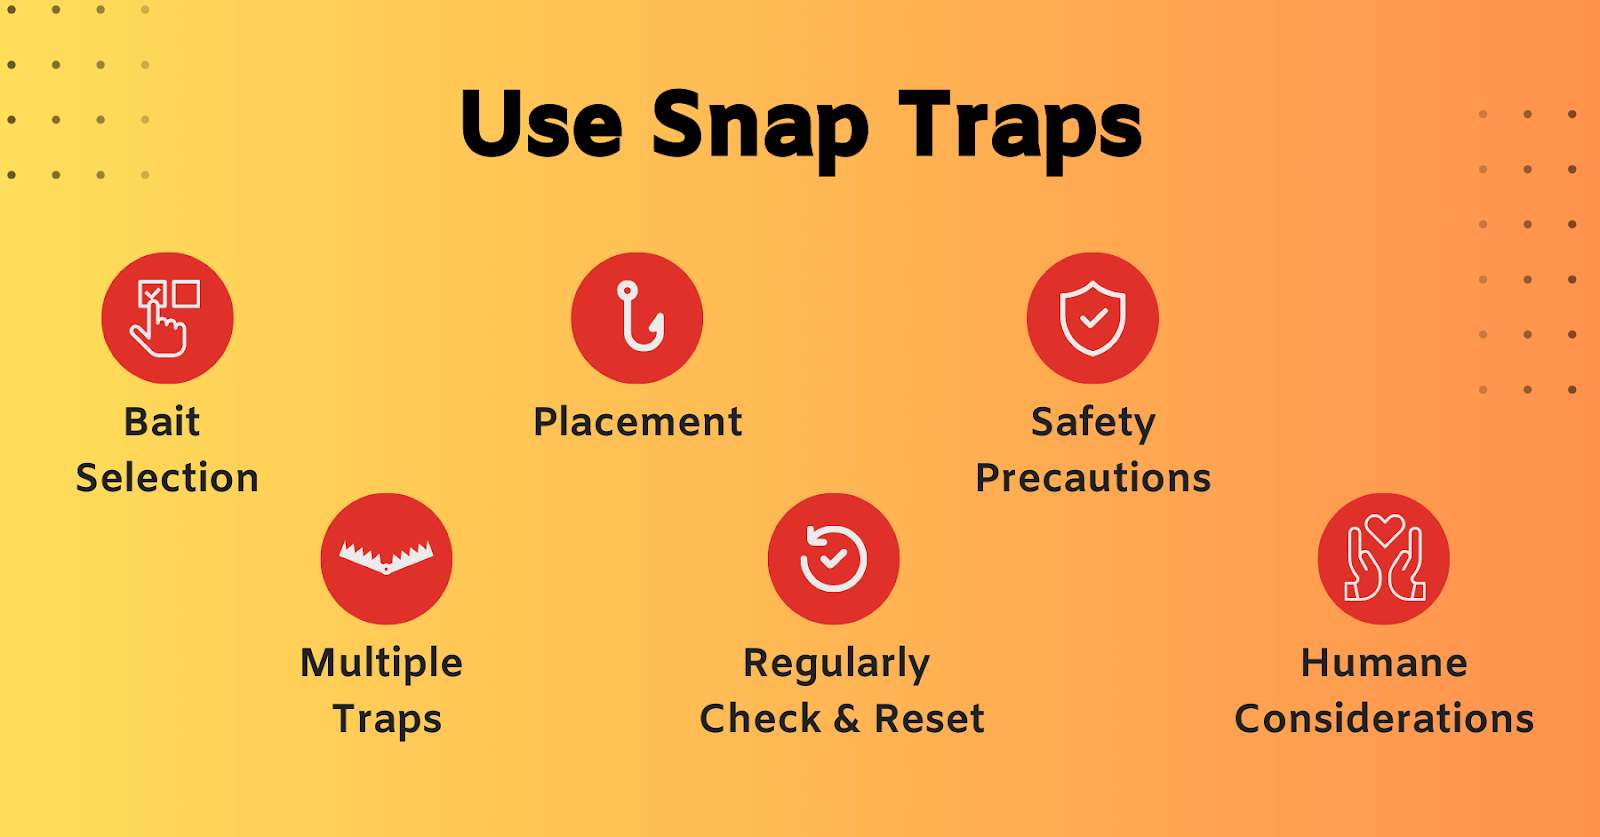 Use Snap Traps